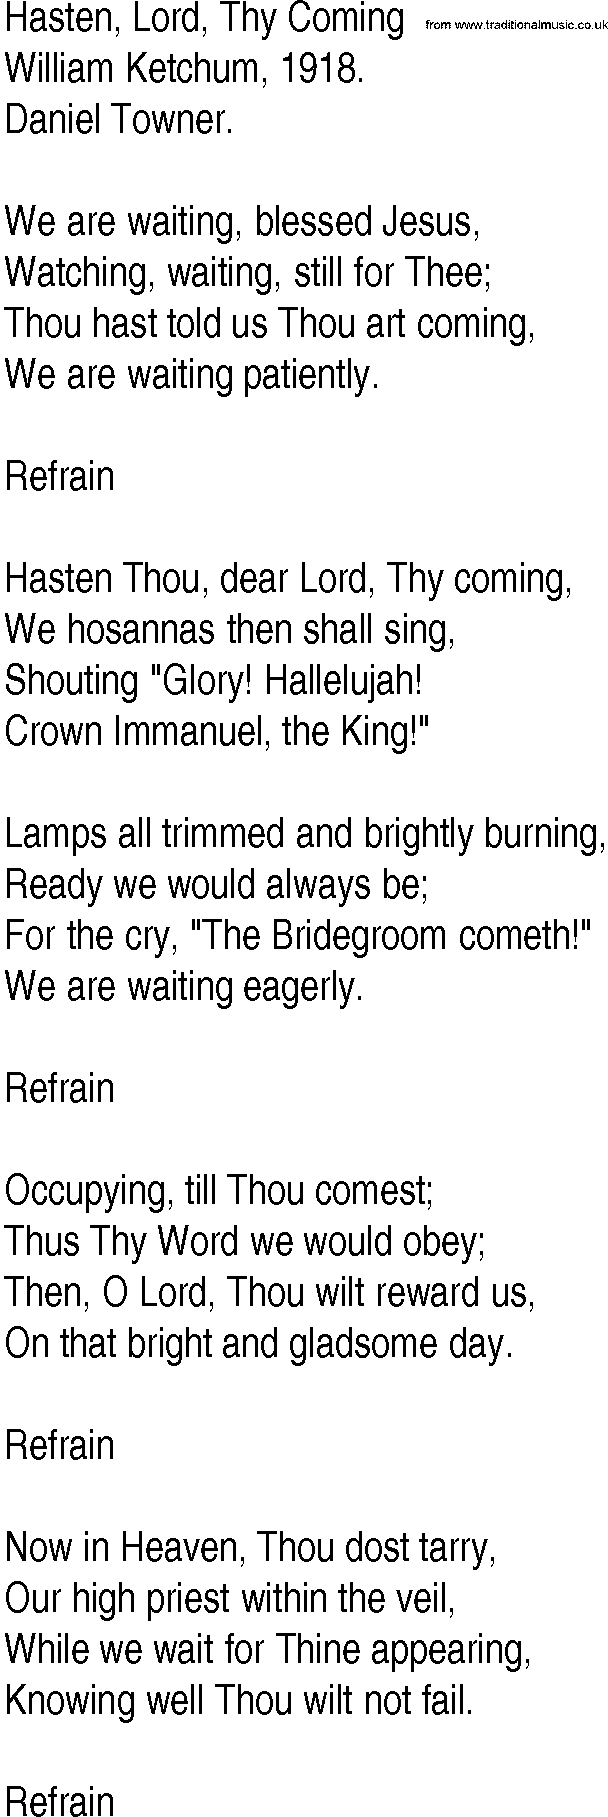 Hymn and Gospel Song: Hasten, Lord, Thy Coming by William Ketchum lyrics